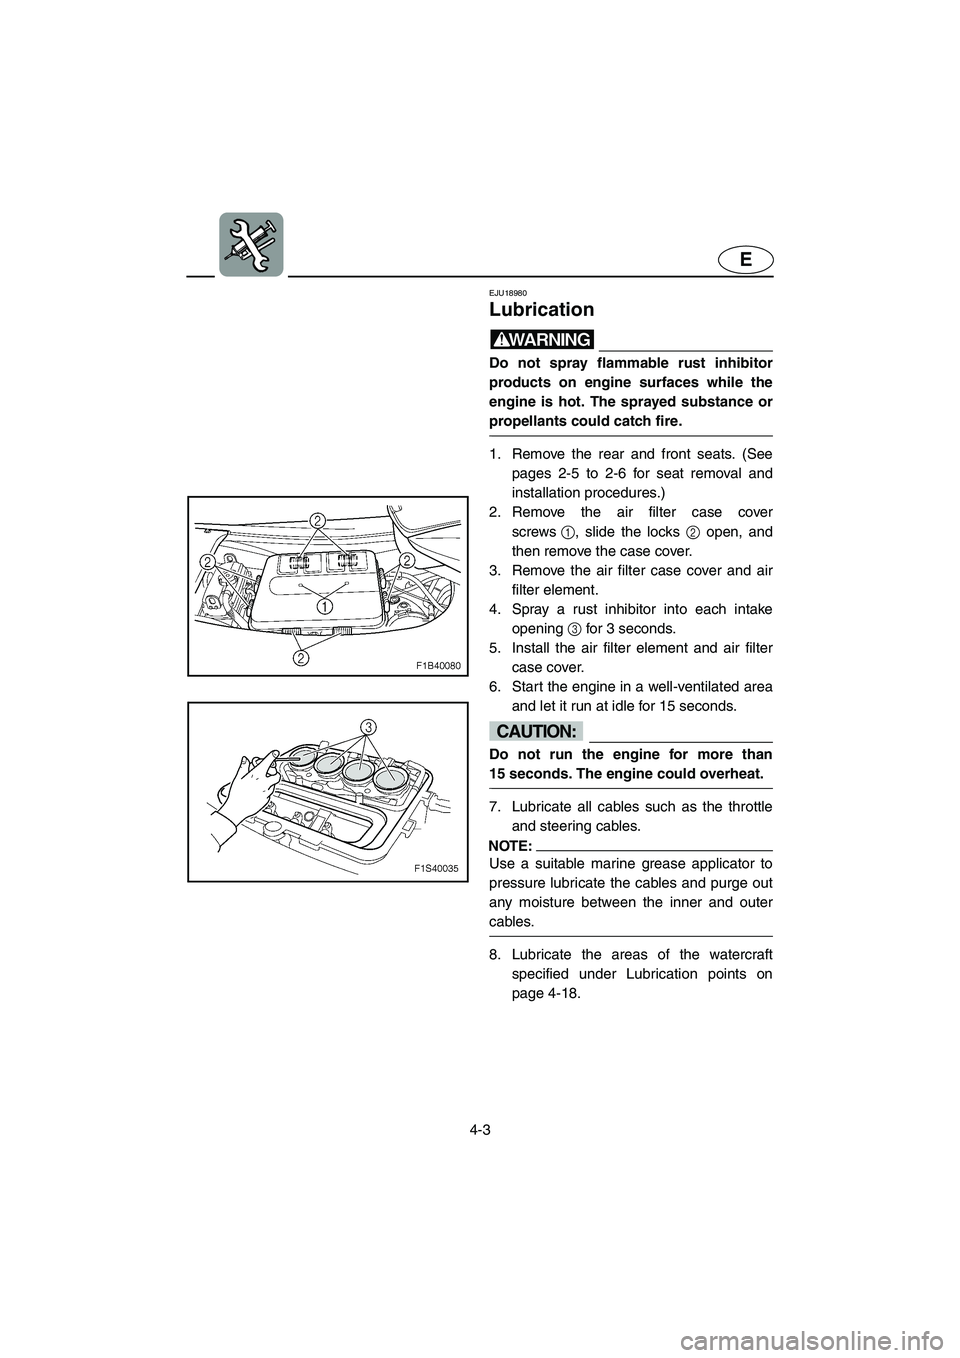 YAMAHA FX HO 2006  Owners Manual 4-3
E
EJU18980 
Lubrication 
WARNING@ Do not spray flammable rust inhibitor
products on engine surfaces while the
engine is hot. The sprayed substance or
propellants could catch fire. 
@ 
1. Remove th